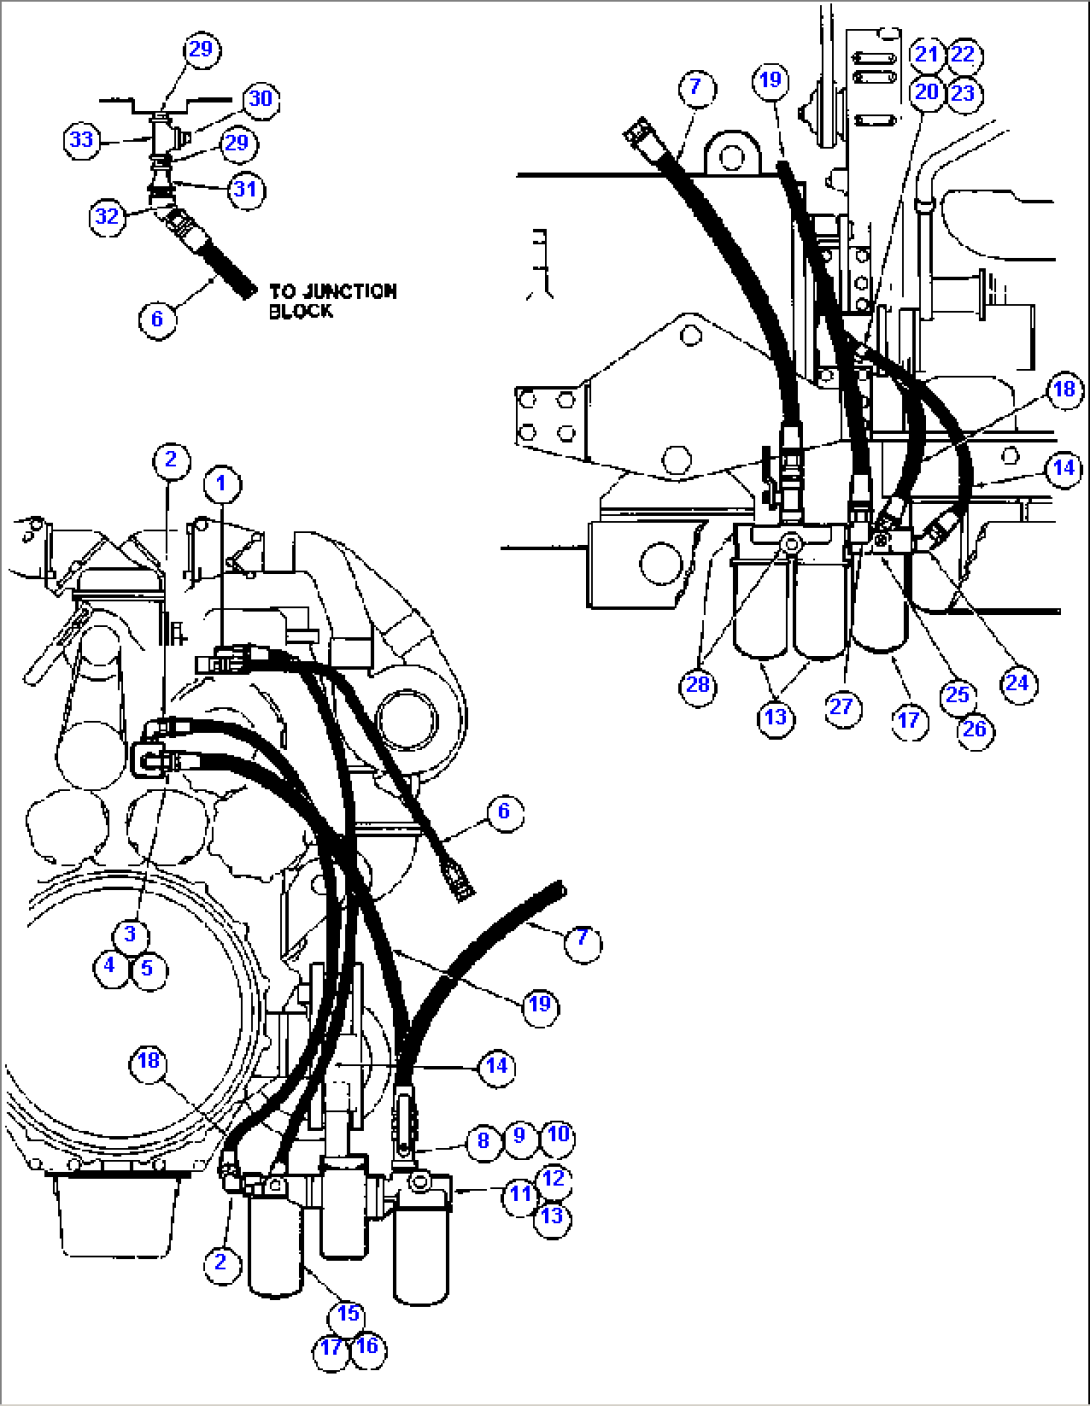 ENGINE FUEL PIPING